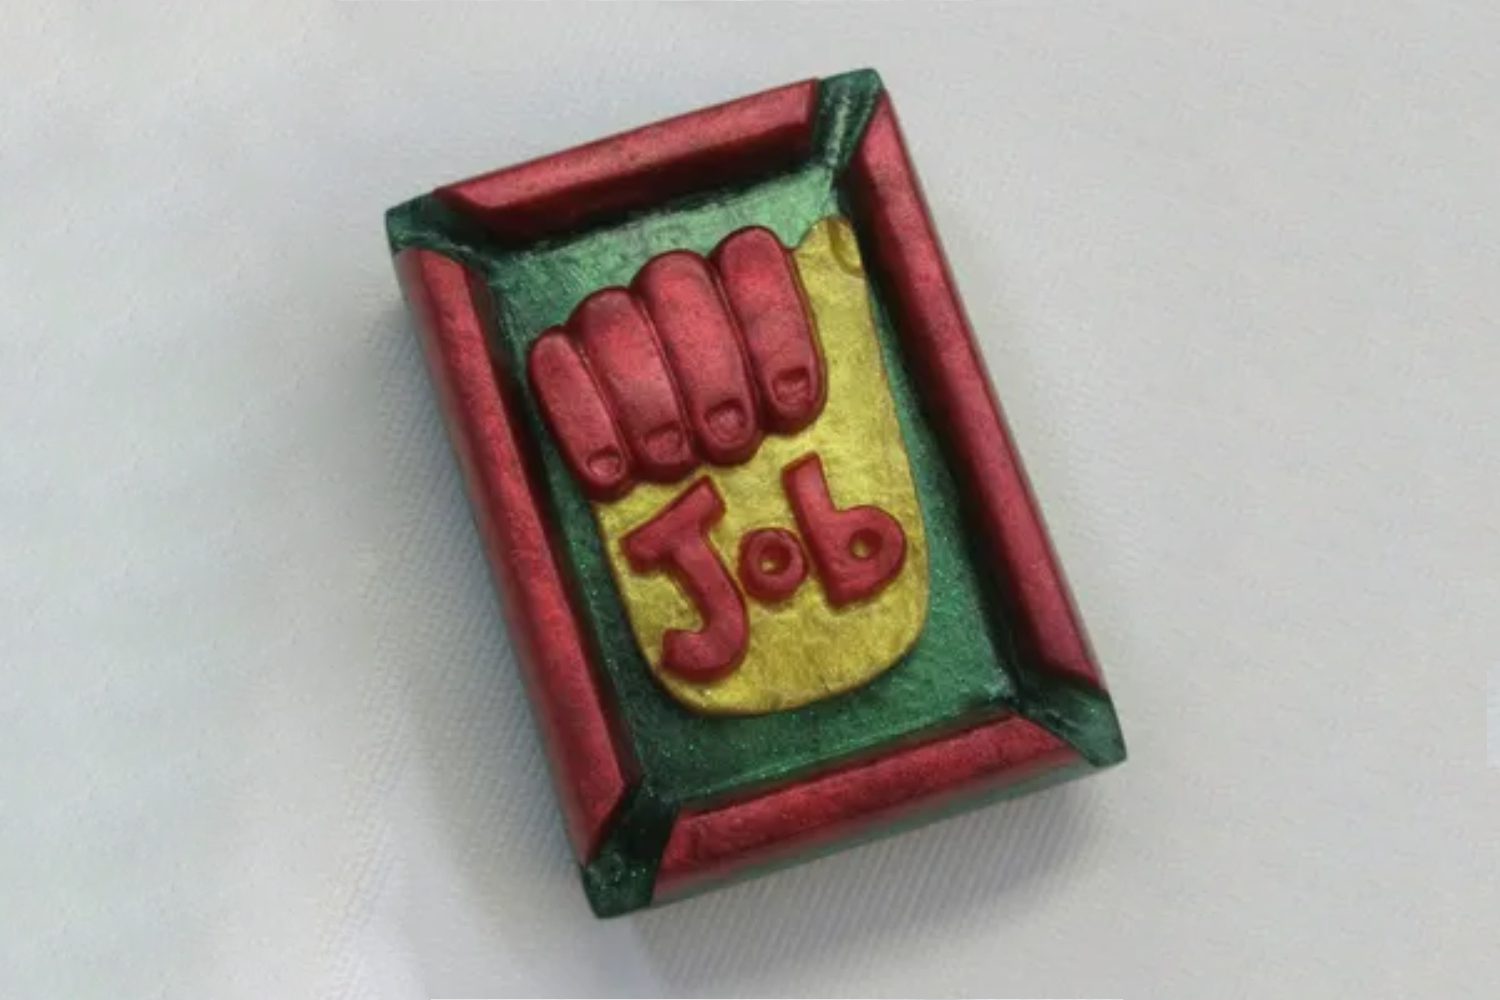 A rectangular object with the word " job " written on it.